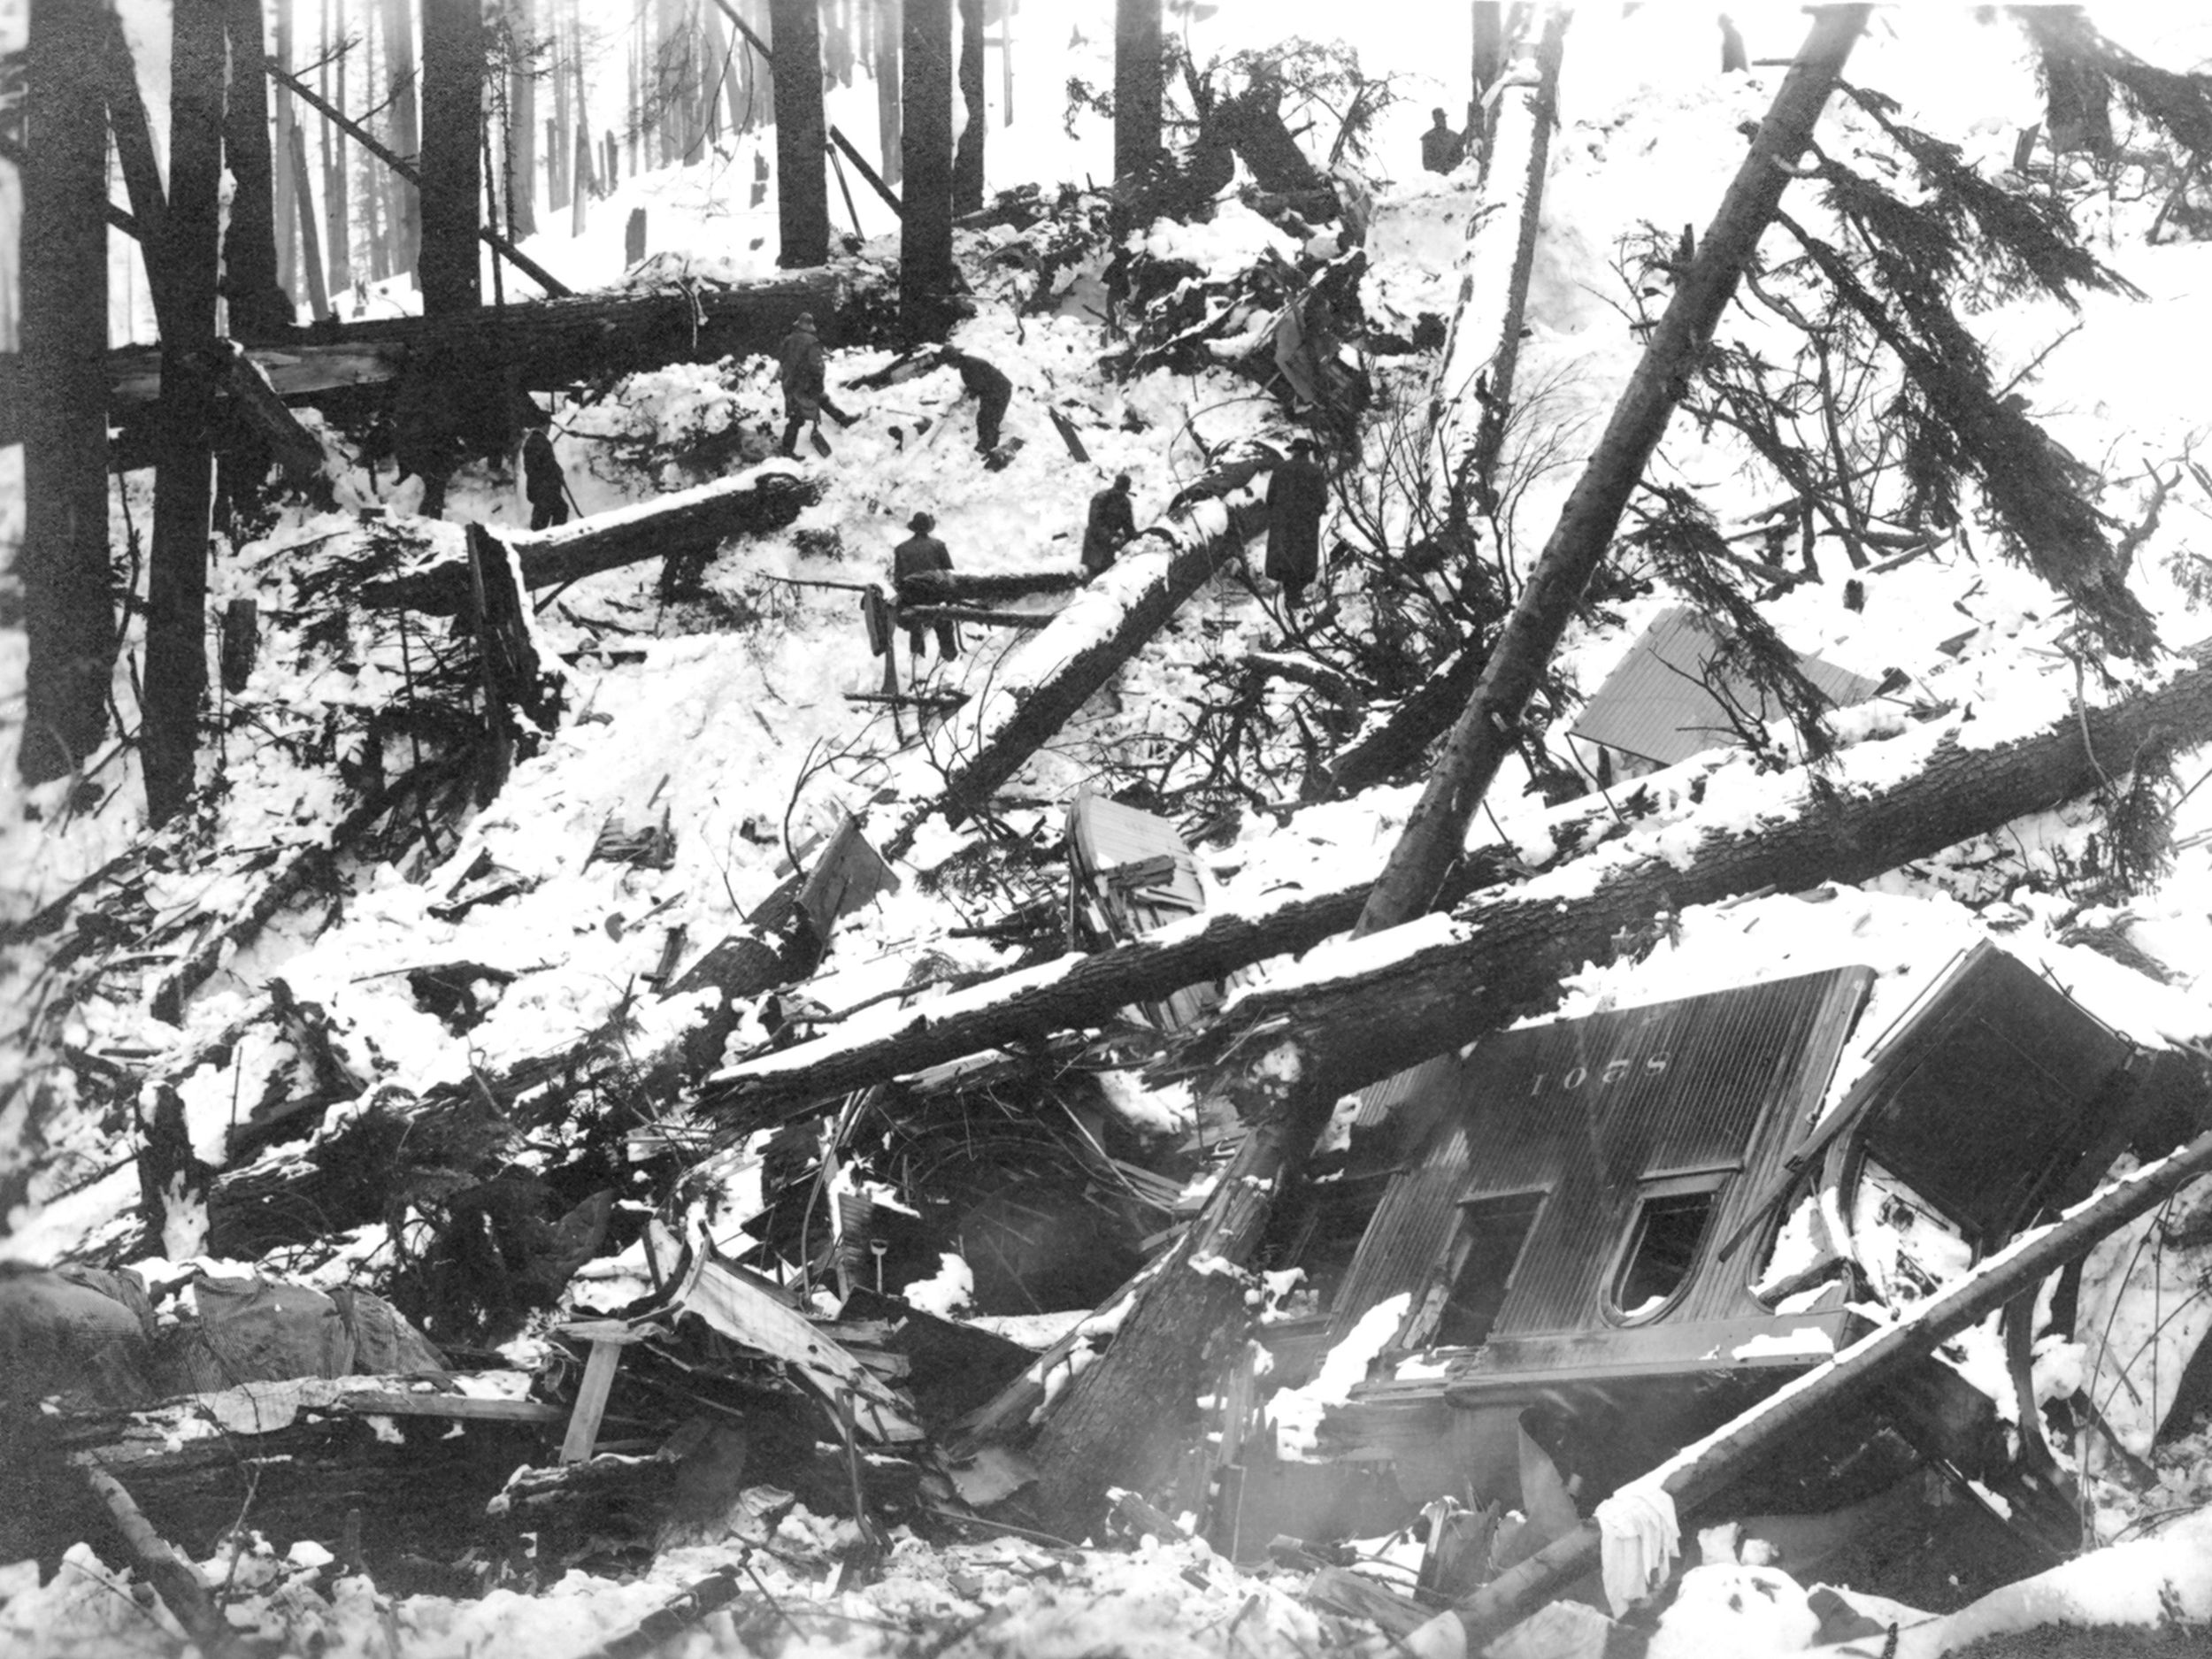 100 years ago avalanche wreaked havoc in the Cascades | The Spokesman-Review